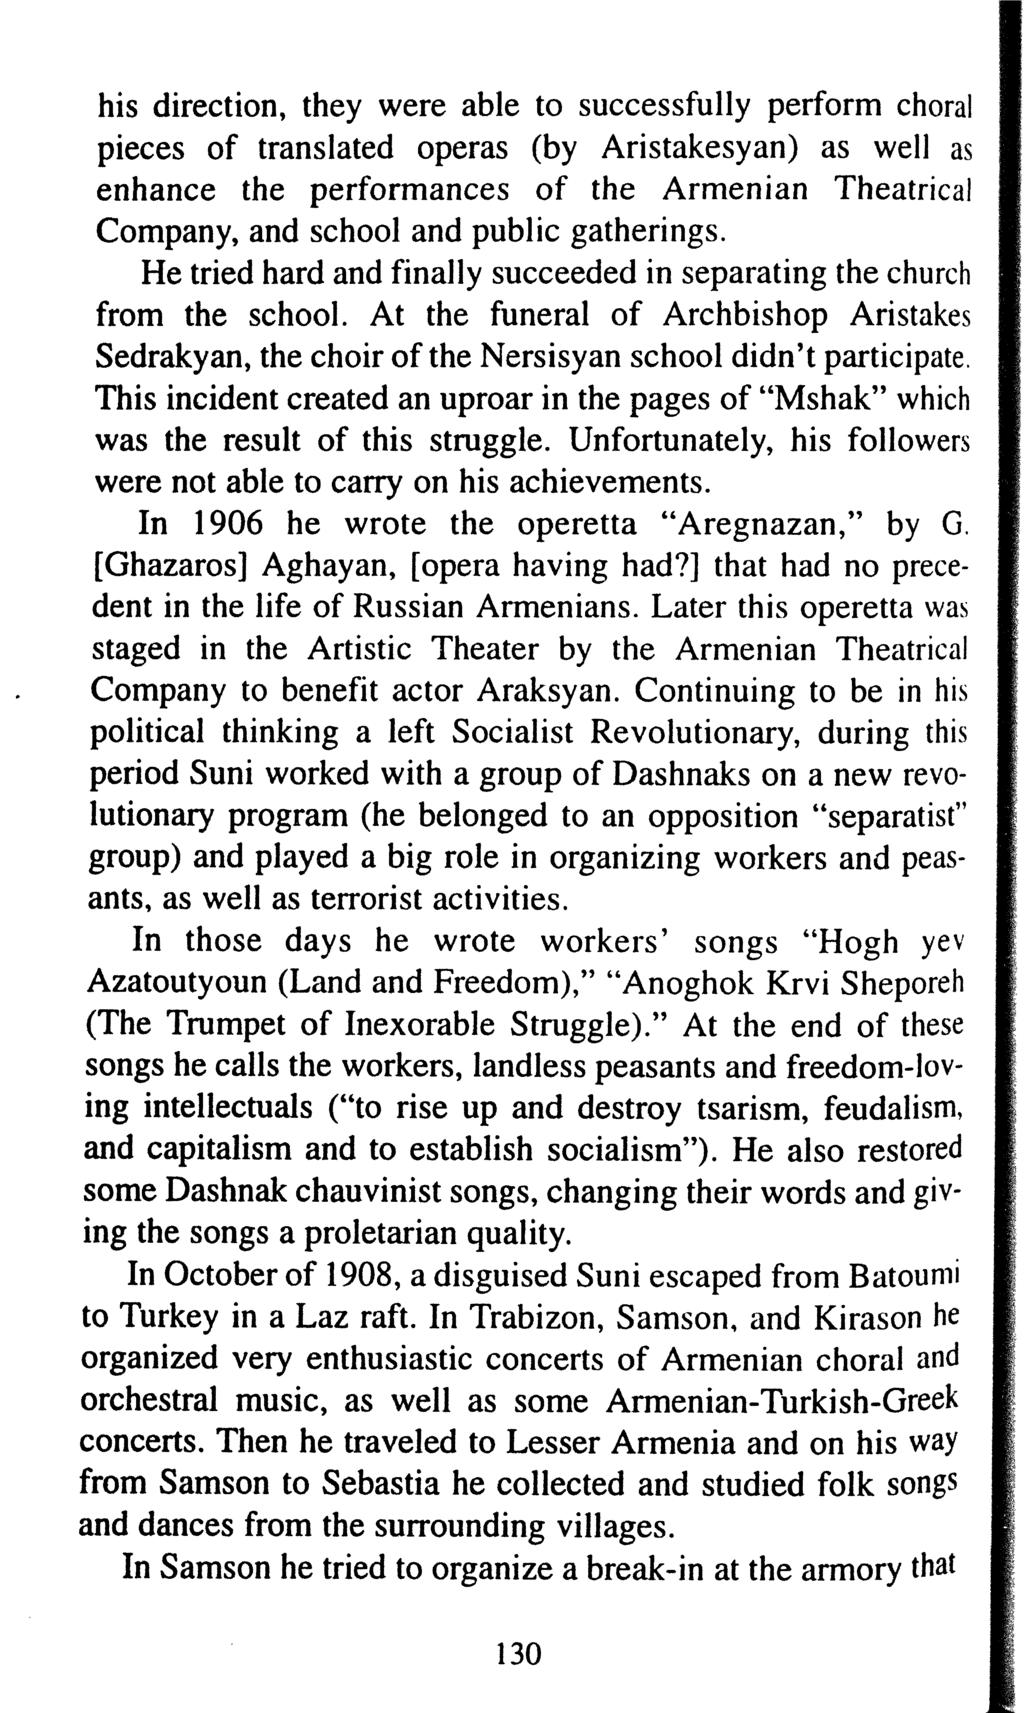 his direction, they were able to successfully perform choral pieces of translated operas (by Aristakesyan) as well as enhance the performances of the Armenian Theatrical Company, and school and